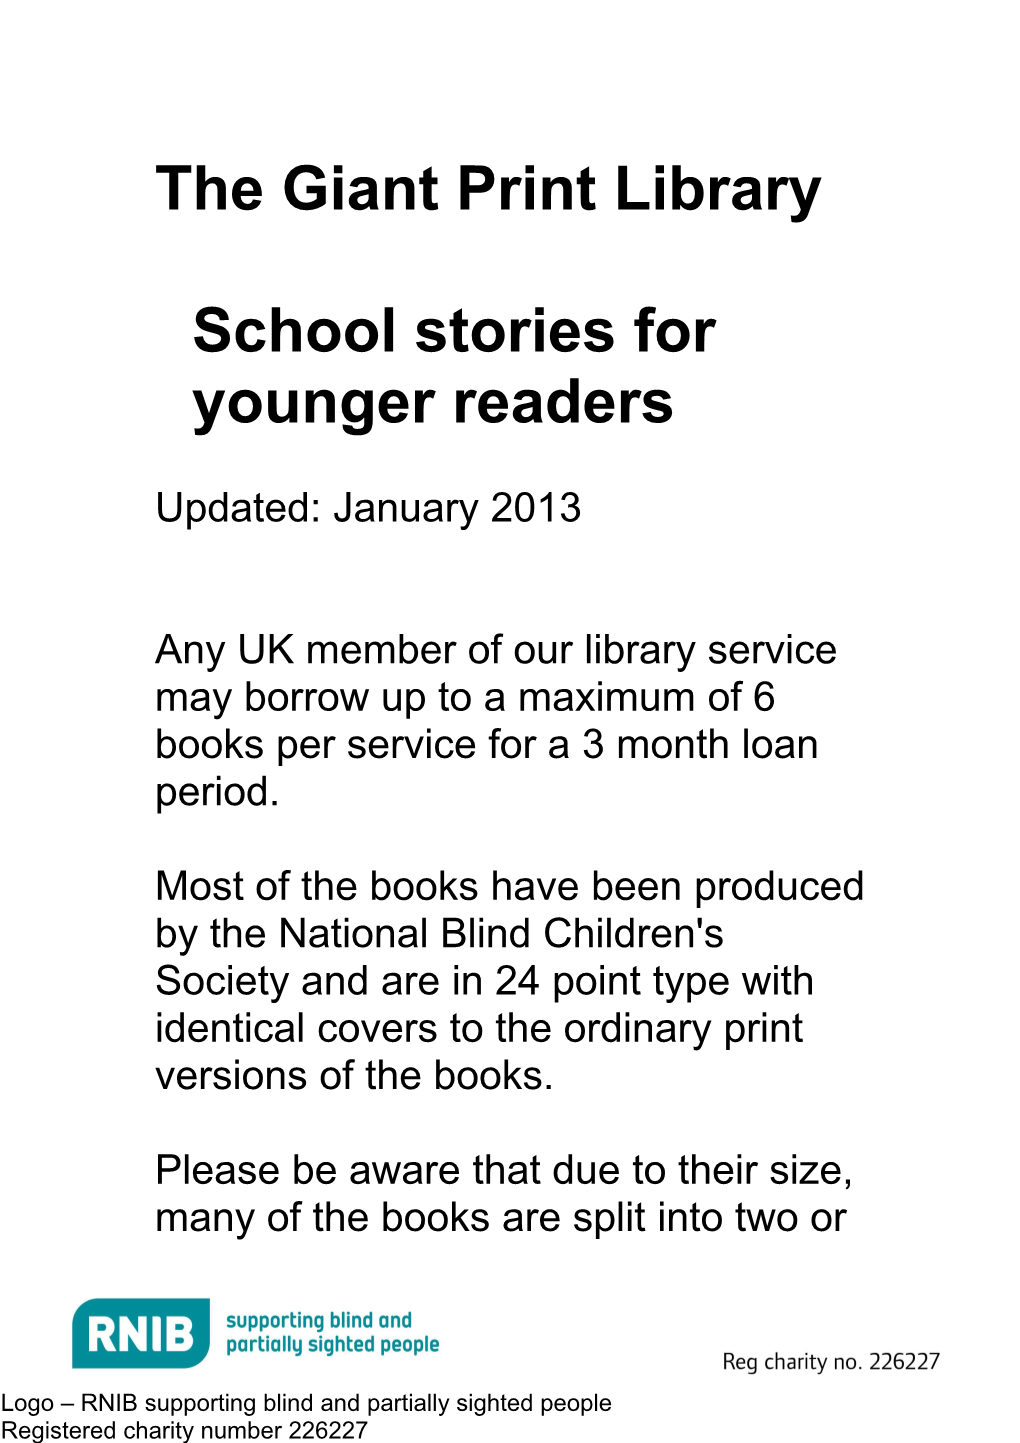 School Stories for Younger Readers in Giant Print (Word, 200KB)